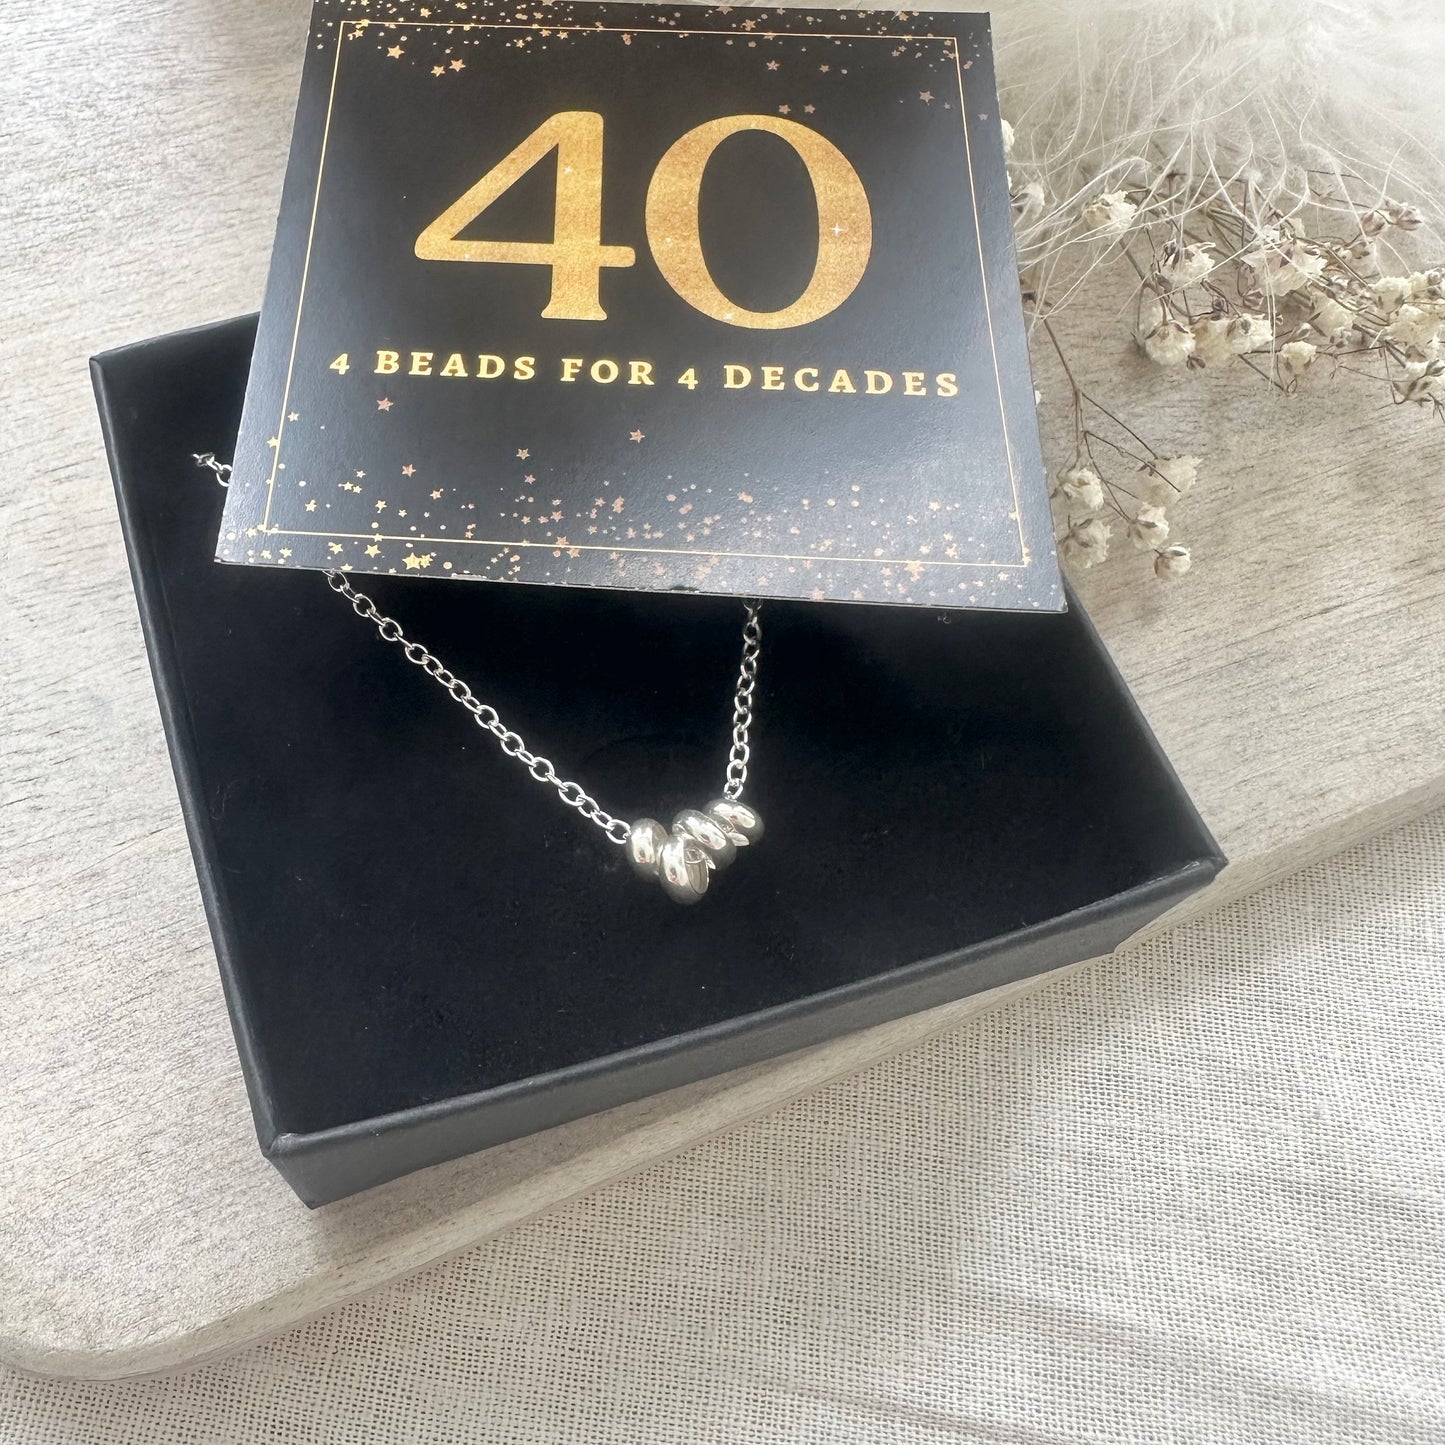 40th Birthday Gift 4 Beads 4 Decades Necklace, Jewellery Gift for Her 40th in Sterling Silver